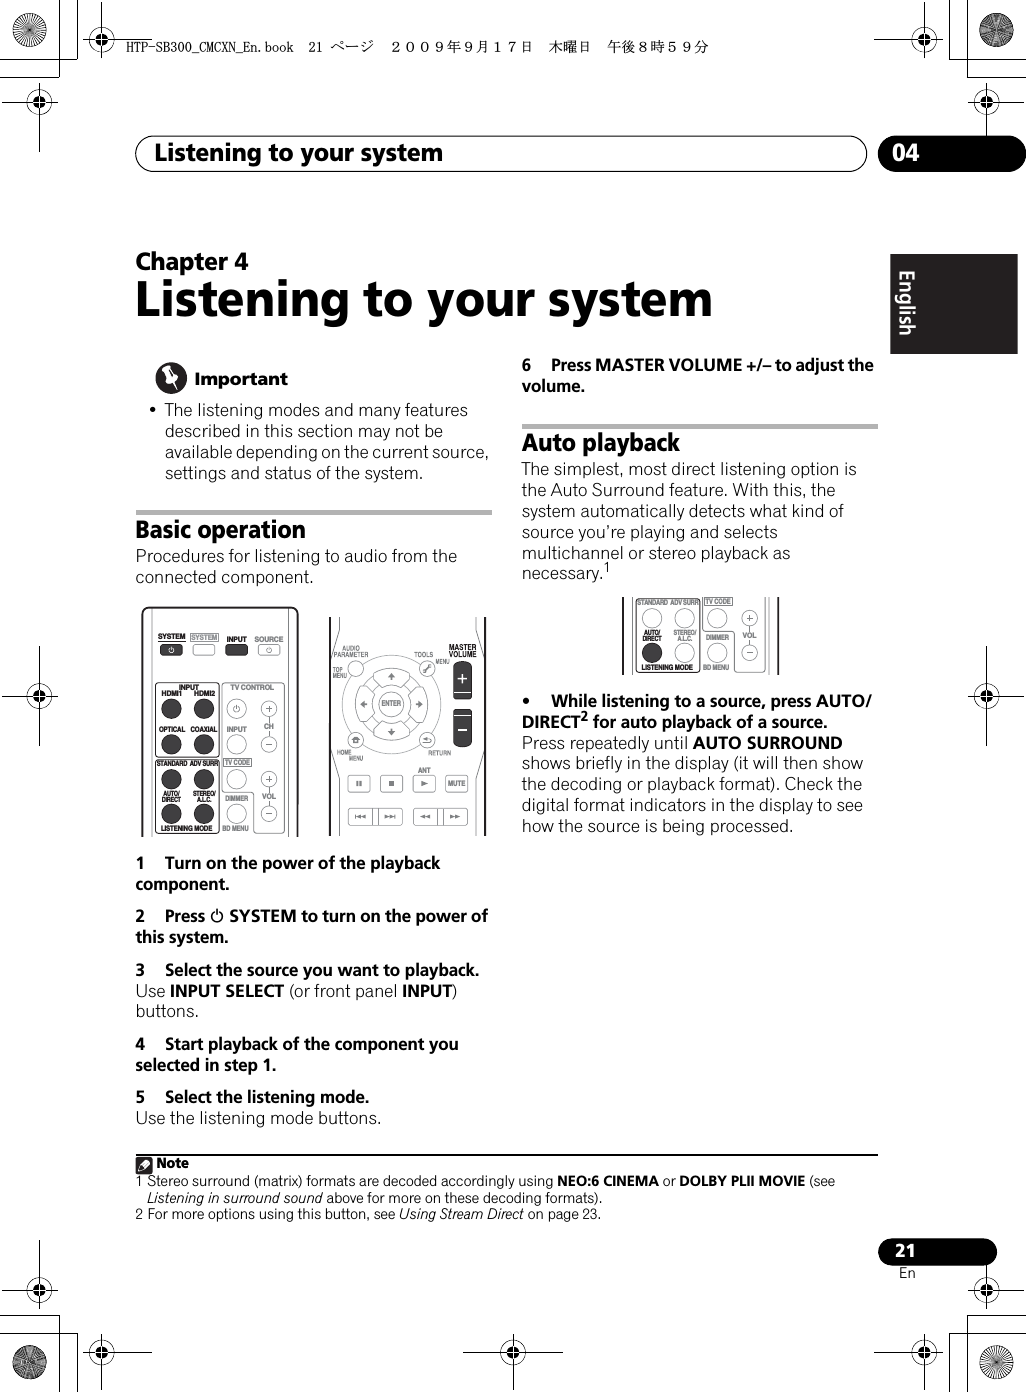 Listening to your system 0421EnEnglish Deutsch Italiano EspañolPyccкийFrançaisNederlandsChapter 4Listening to your system Important• The listening modes and many features described in this section may not be available depending on the current source, settings and status of the system.Basic operationProcedures for listening to audio from the connected component.1 Turn on the power of the playback component.2 Press 1 SYSTEM to turn on the power of this system.3 Select the source you want to playback.Use INPUT SELECT (or front panel INPUT)buttons.4 Start playback of the component you selected in step 1.5 Select the listening mode.Use the listening mode buttons.6Press MASTER VOLUME +/– to adjust the volume.Auto playbackThe simplest, most direct listening option is the Auto Surround feature. With this, the system automatically detects what kind of source you’re playing and selects multichannel or stereo playback as necessary.1• While listening to a source, press AUTO/DIRECT2 for auto playback of a source.Press repeatedly until AUTO SURROUNDshows briefly in the display (it will then show the decoding or playback format). Check the digital format indicators in the display to see how the source is being processed.SYSTEMSYSTEMTV CONTROLHDMI1 HDMI2OPTICALLISTENING MODECOAXIALSTANDARDAUTO/DIRECT STEREO/A.L.C.ADV SURRCHVOLBD MENUDIMMERSOURCEINPUTINPUTINPUTTV CODEENTERMUTEANTNote1 Stereo surround (matrix) formats are decoded accordingly using NEO:6 CINEMA or DOLBY PLII MOVIE (see Listening in surround sound above for more on these decoding formats).2 For more options using this button, see Using Stream Direct on page 23.LISTENING MODESTANDARDAUTO/DIRECT STEREO/A.L.C.ADV SURRVOLBD MENUDIMMERTV CODE*625$A%/%:0A&apos;PDQQMࡍ࡯ࠫ㧞㧜㧜㧥ᐕ㧥᦬㧝㧣ᣣޓᧁᦐᣣޓඦᓟ㧤ᤨ㧡㧥ಽ